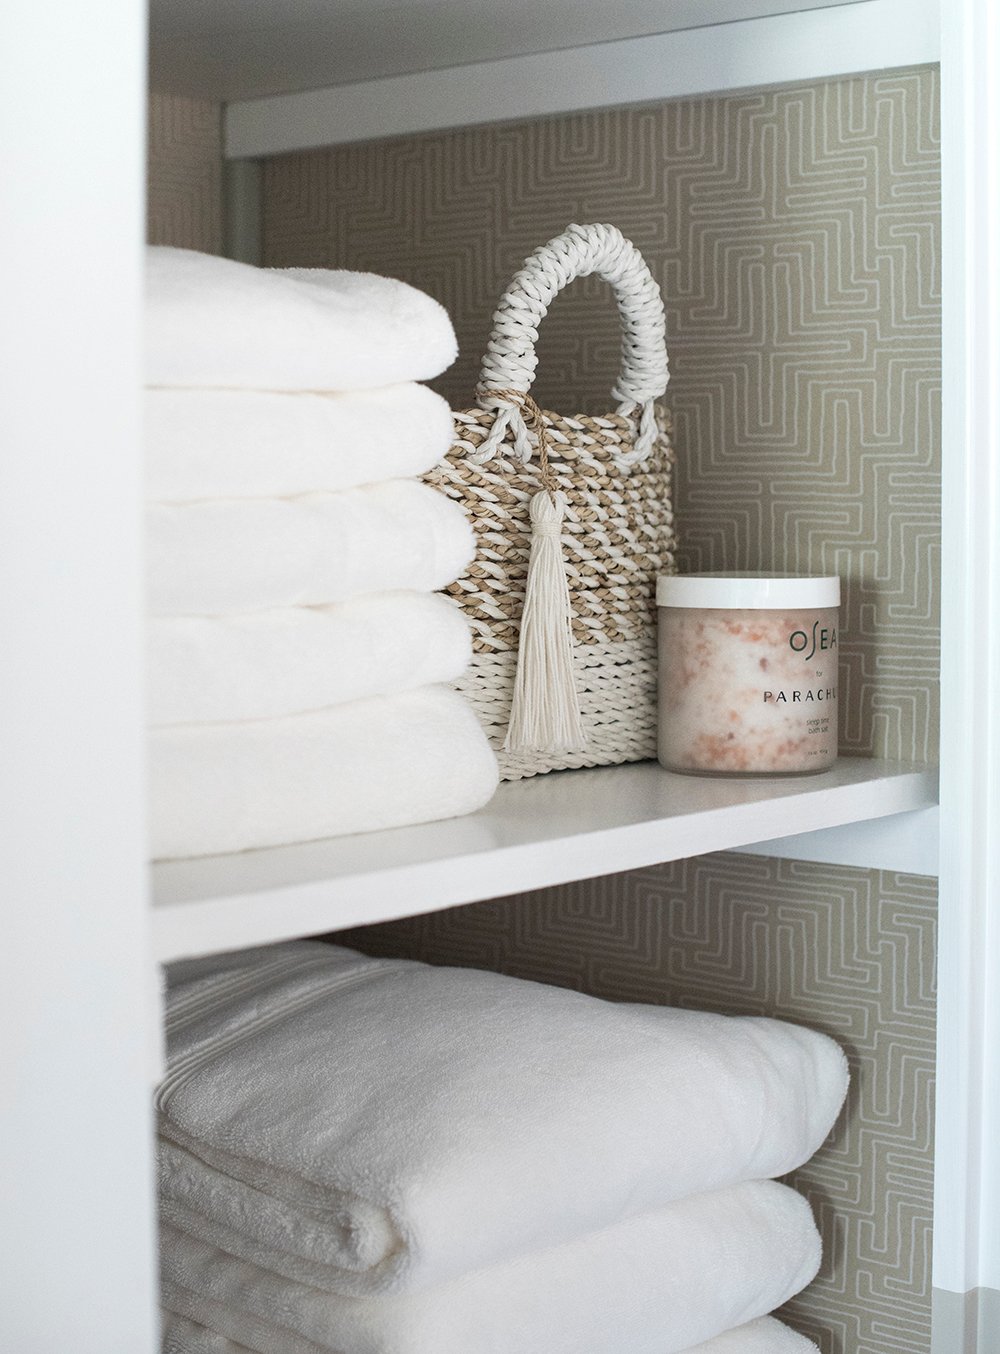 Linen Closet Update & Tips for Choosing The Right Paint - roomfortuesday.com